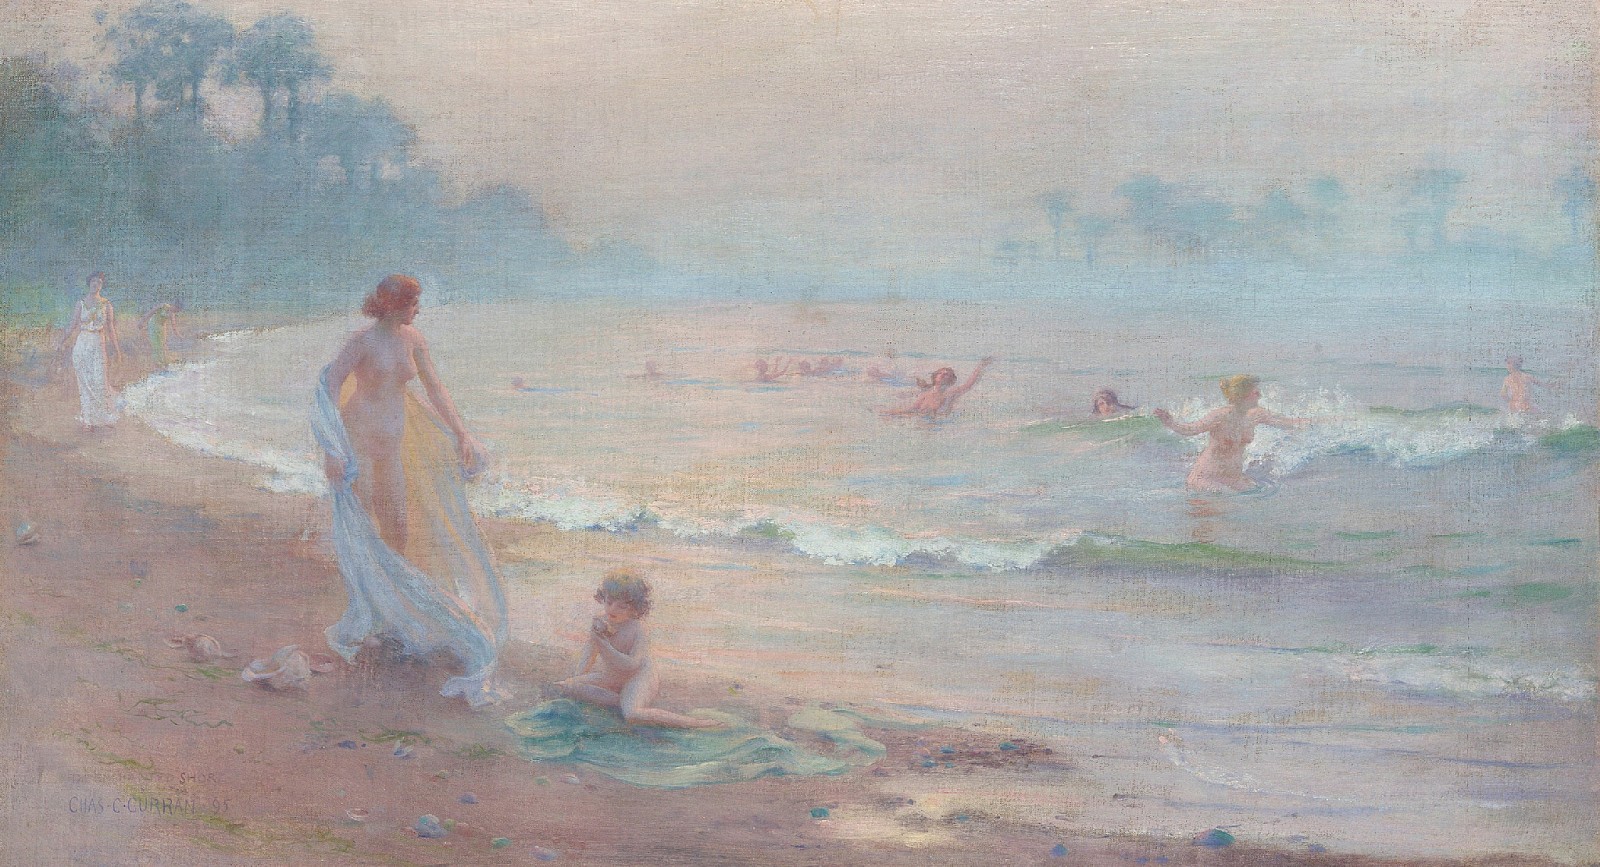 Charles Courtney Curran, The Enchanted Shore, 1895
oil on canvas, 17 7/8 x 32 in. (45.4 x 81.3 cm)
CCC190401